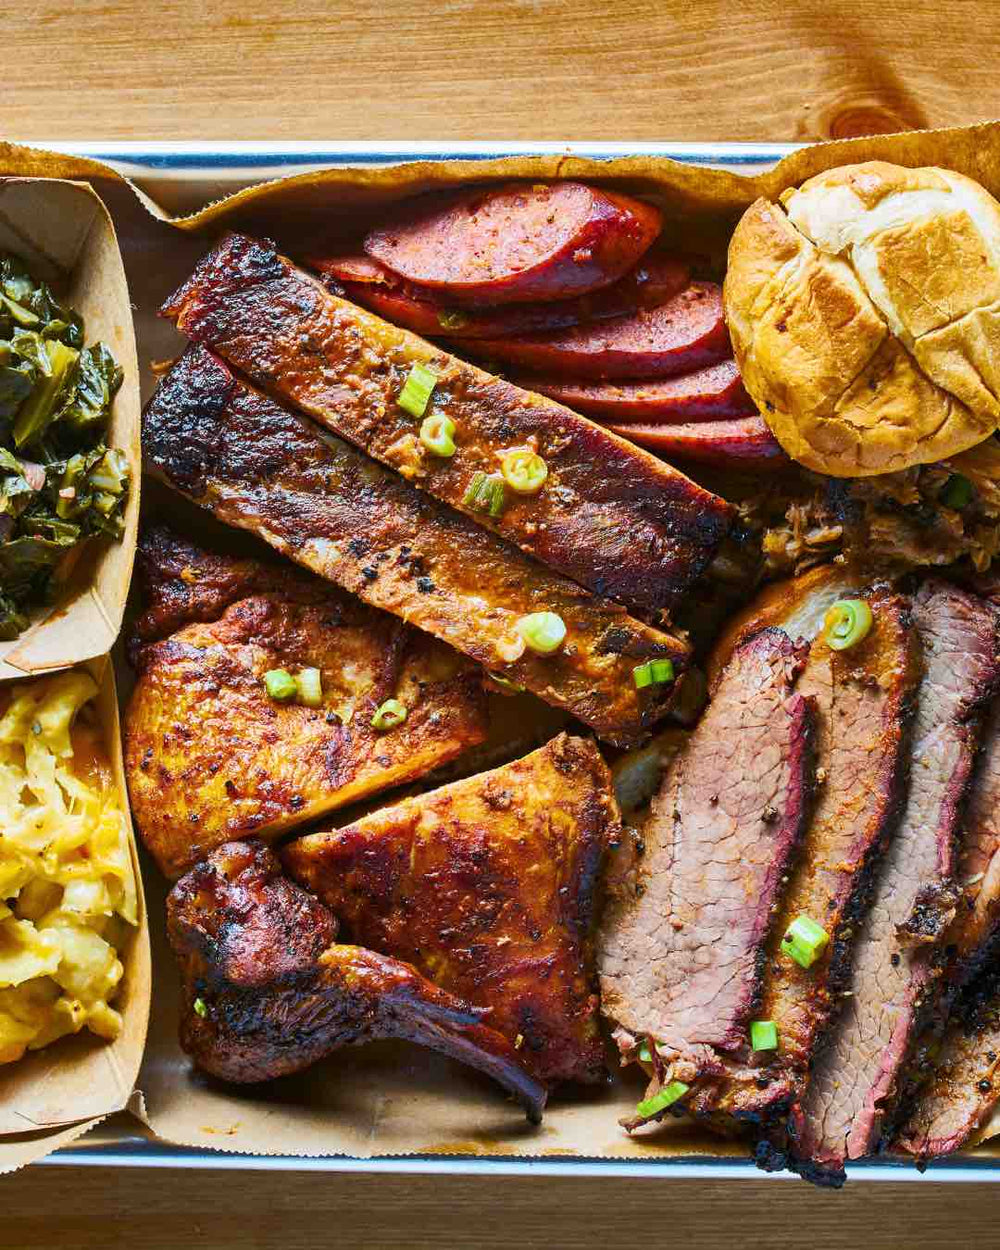 Tri Tip vs Brisket: Choosing the Right Cut for Your BBQ